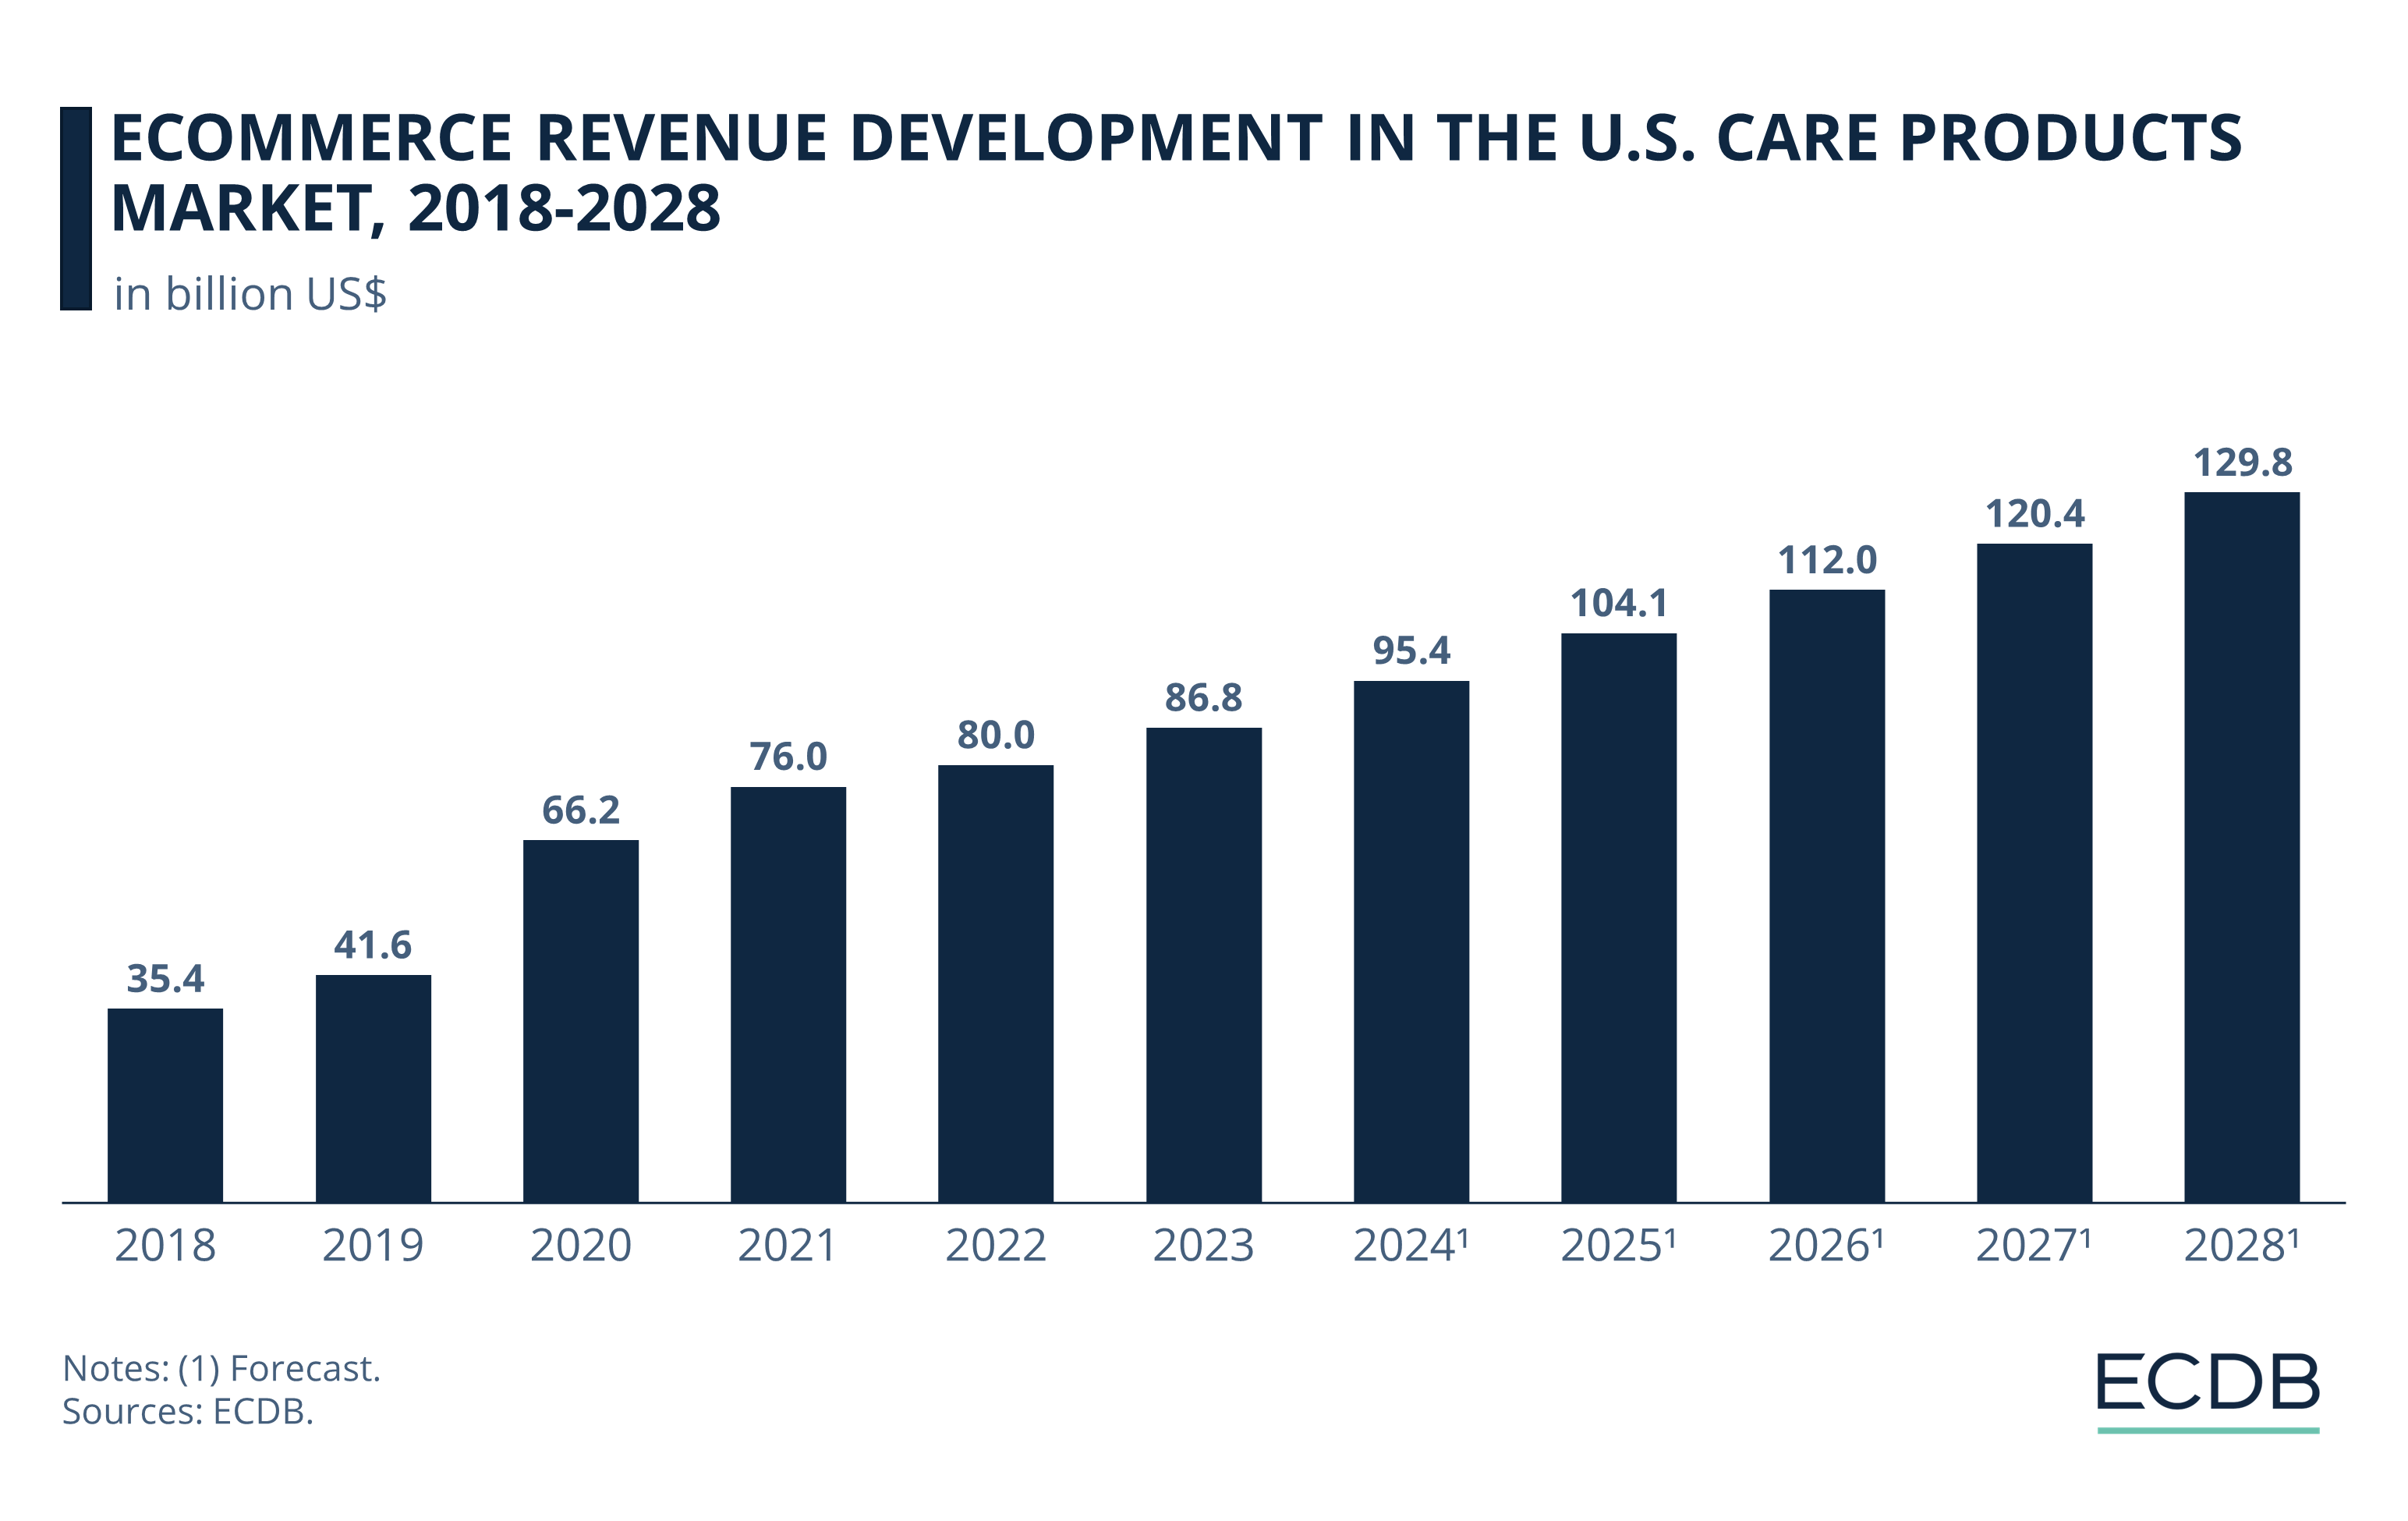 eCommerce Revenue Development in the U.S. Care Products Market, 2018-2028